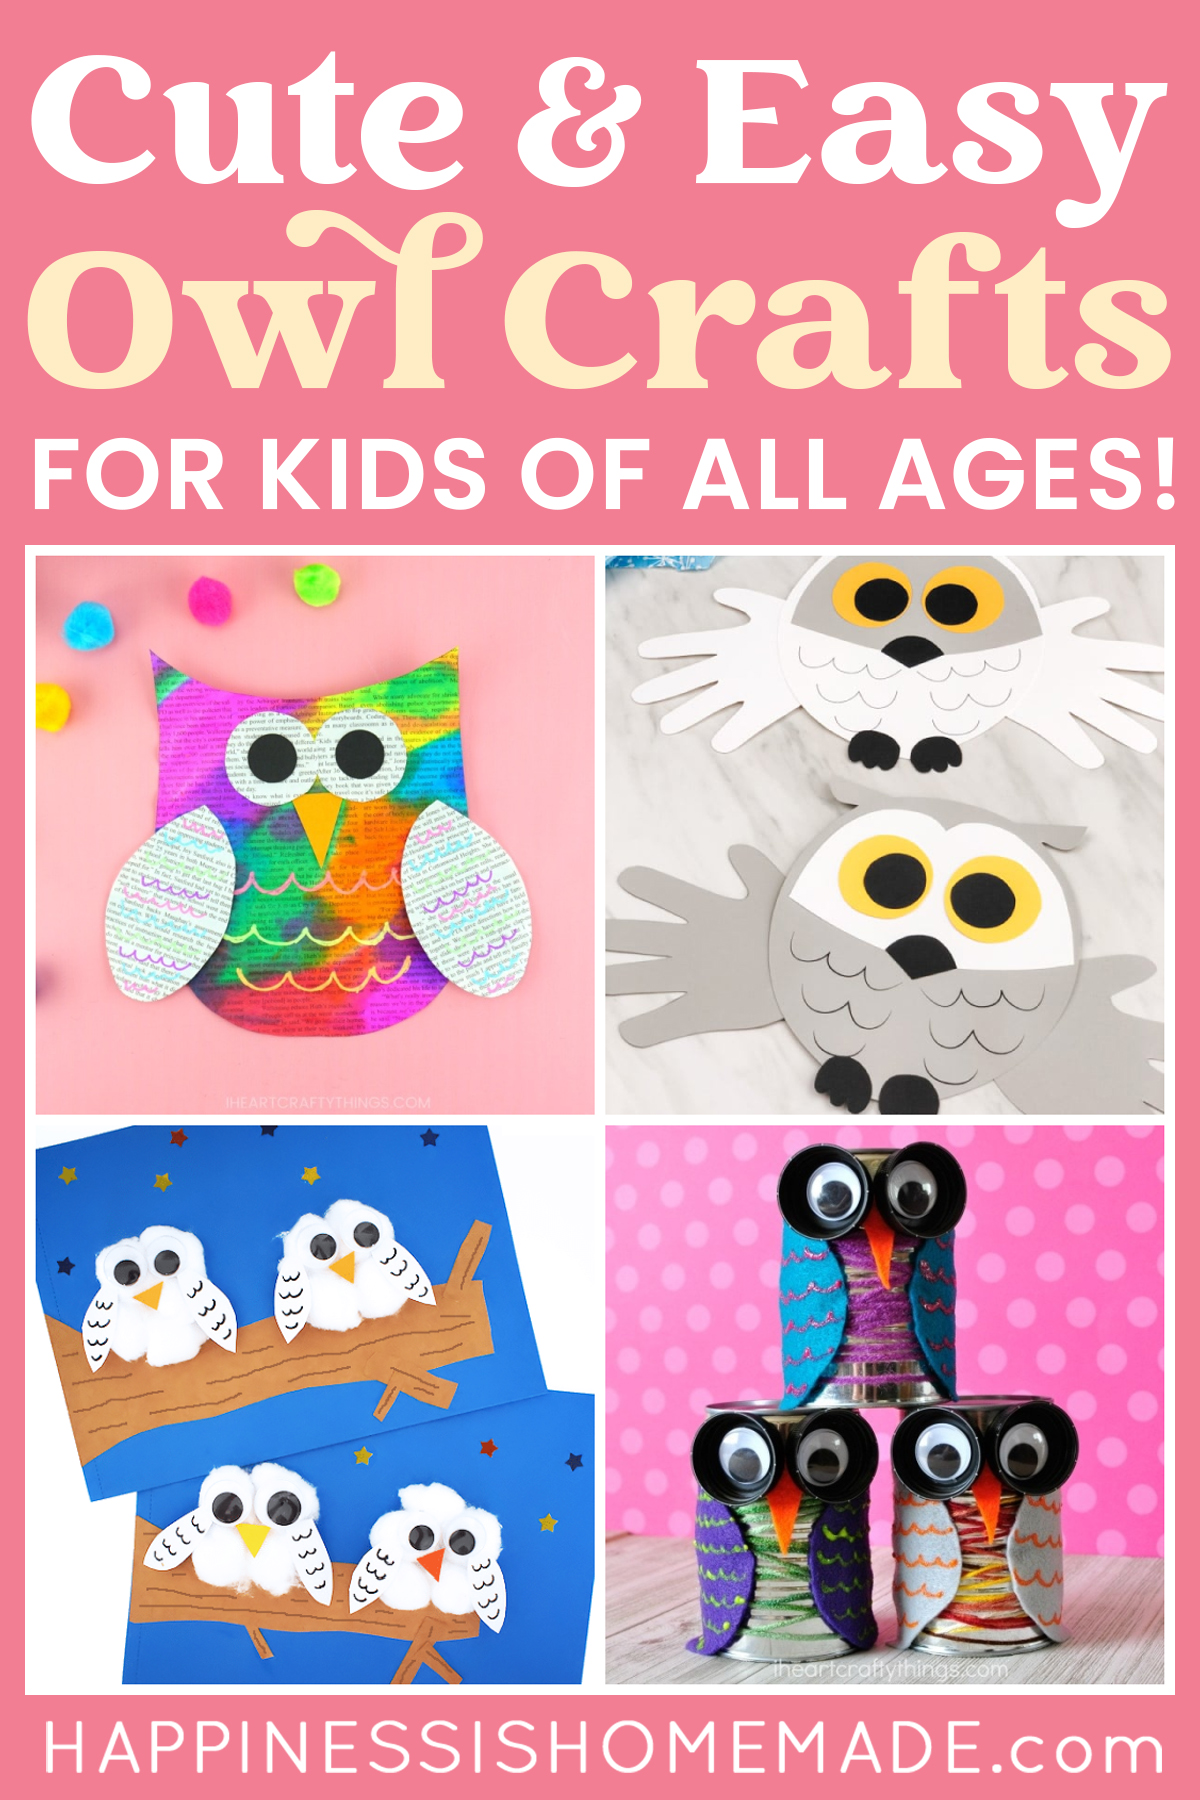 75+ easy Christmas crafts for kids of all ages - Gathered